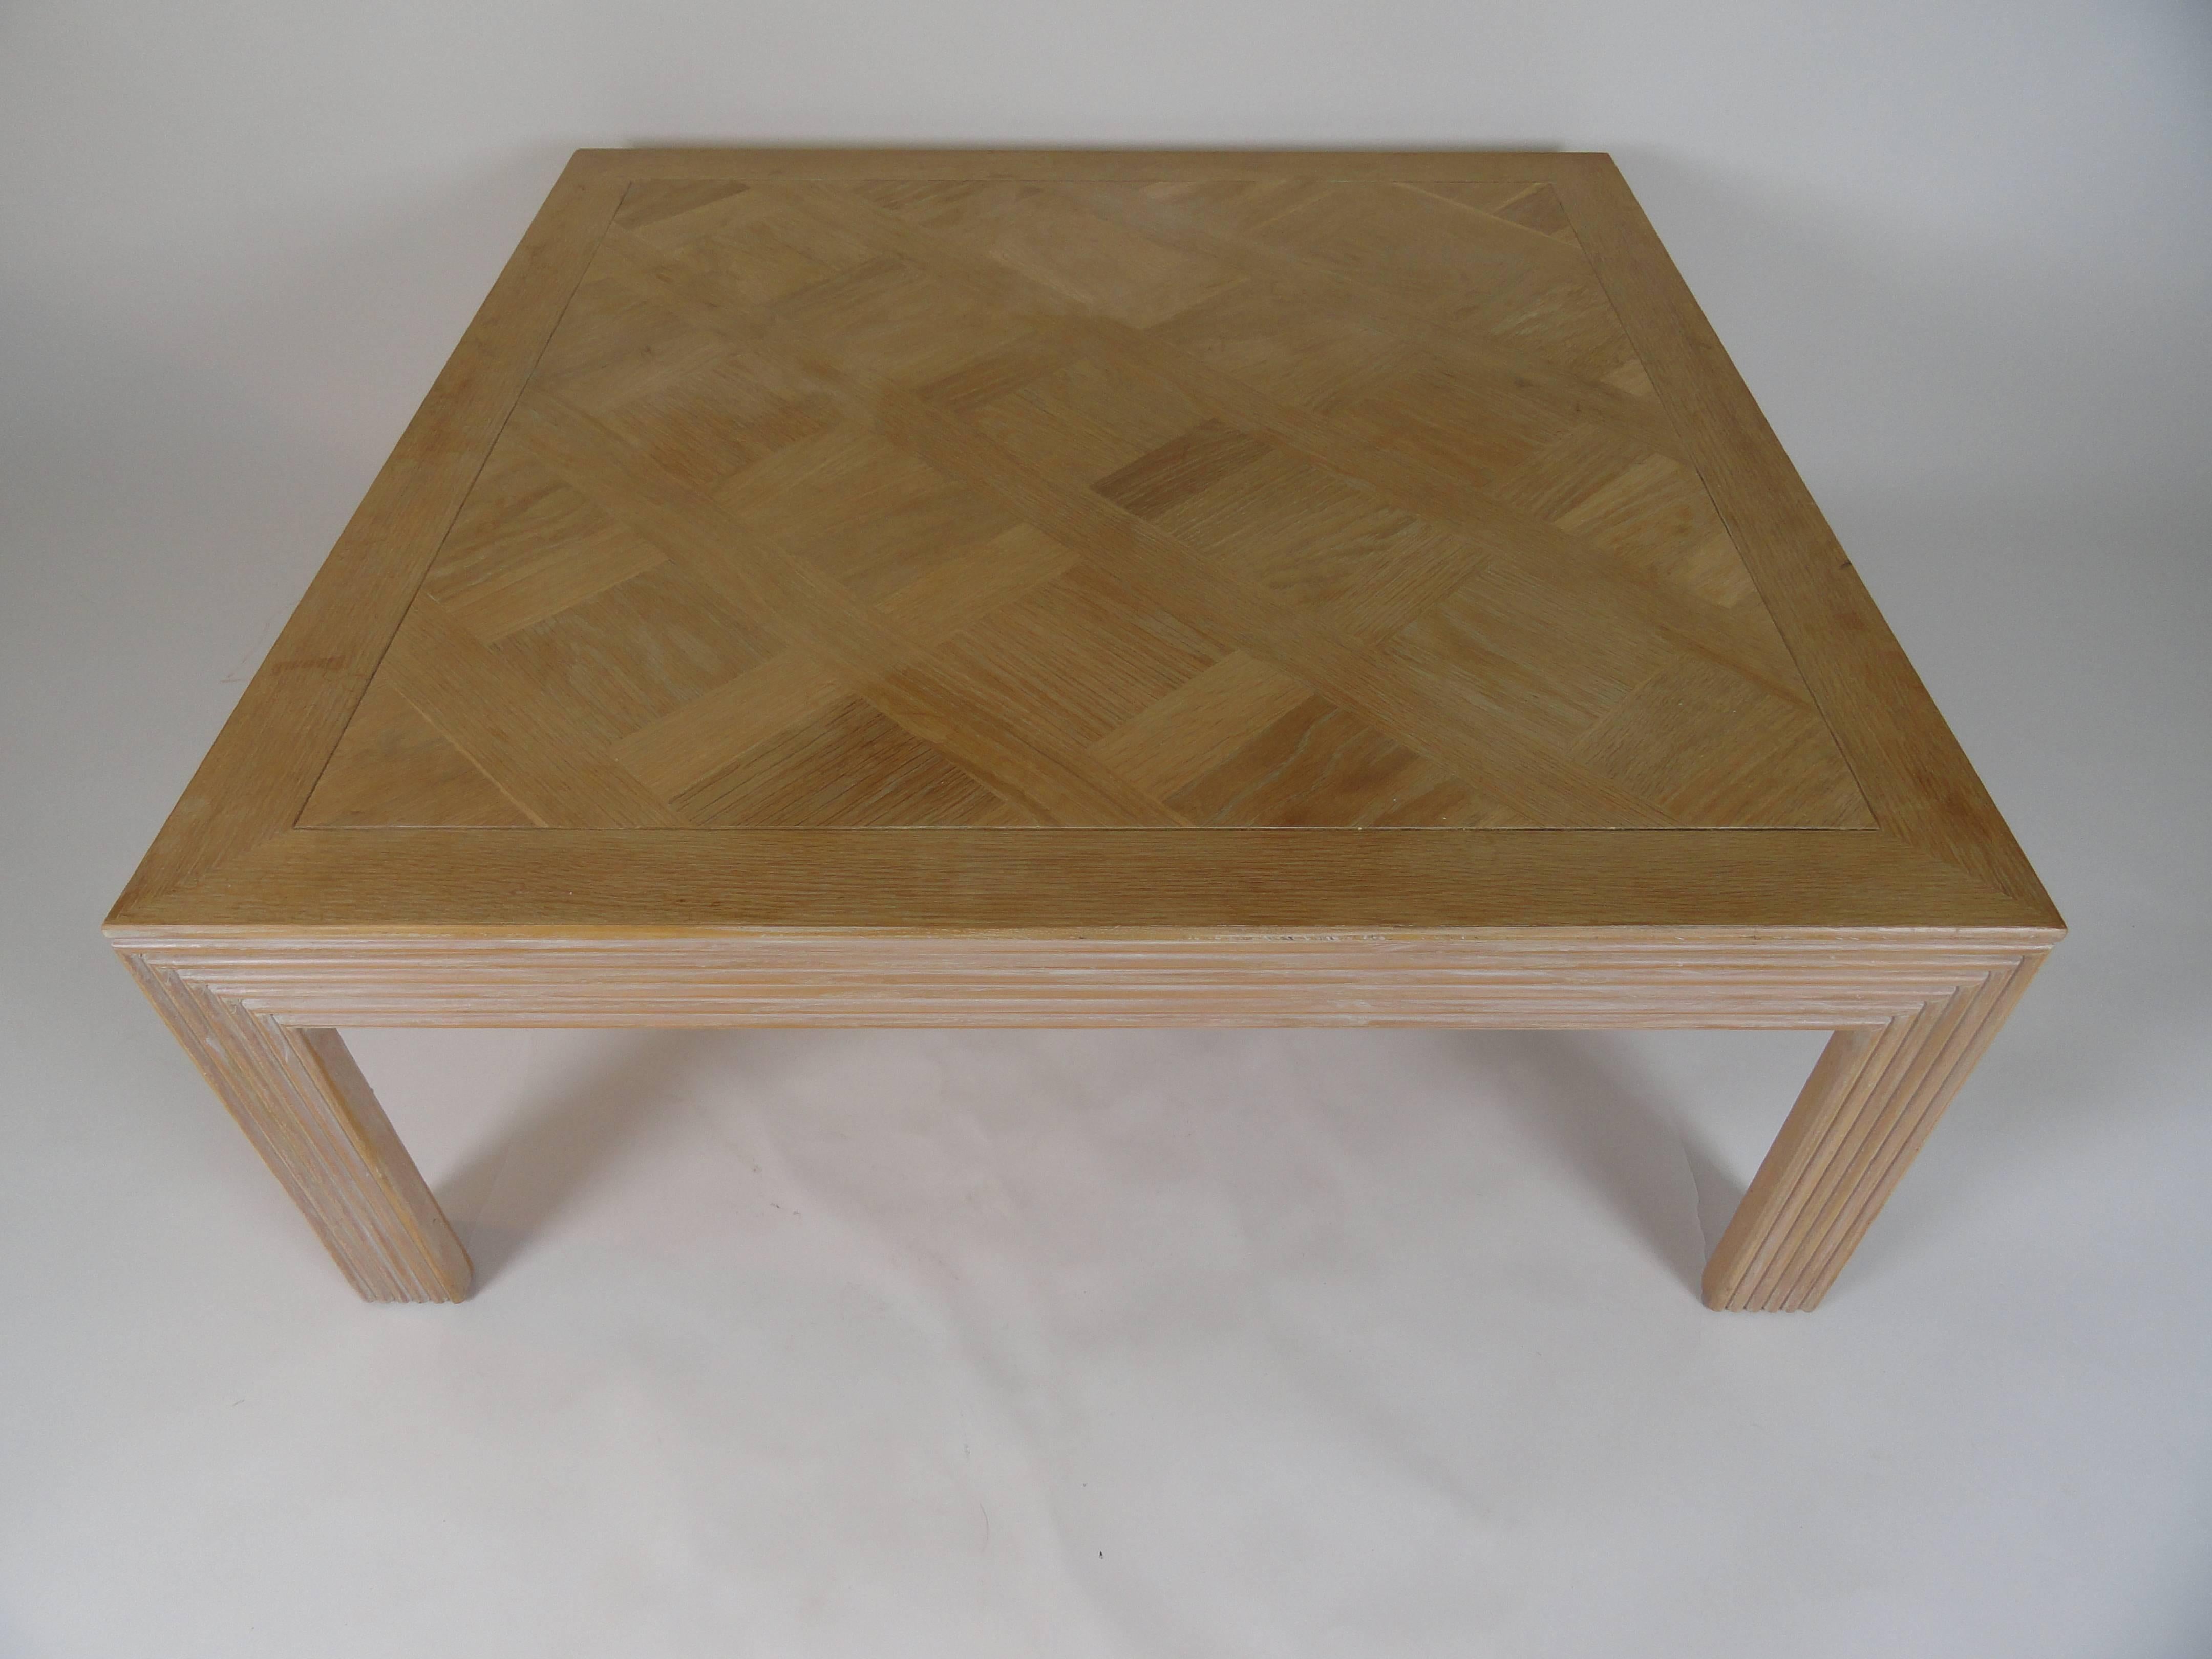 Square Lane Furniture inlaid bleached wood coffee table with fluted wood leg detail.
Stamped on bottom. Bleached top shows slight variations in finish across the piece.